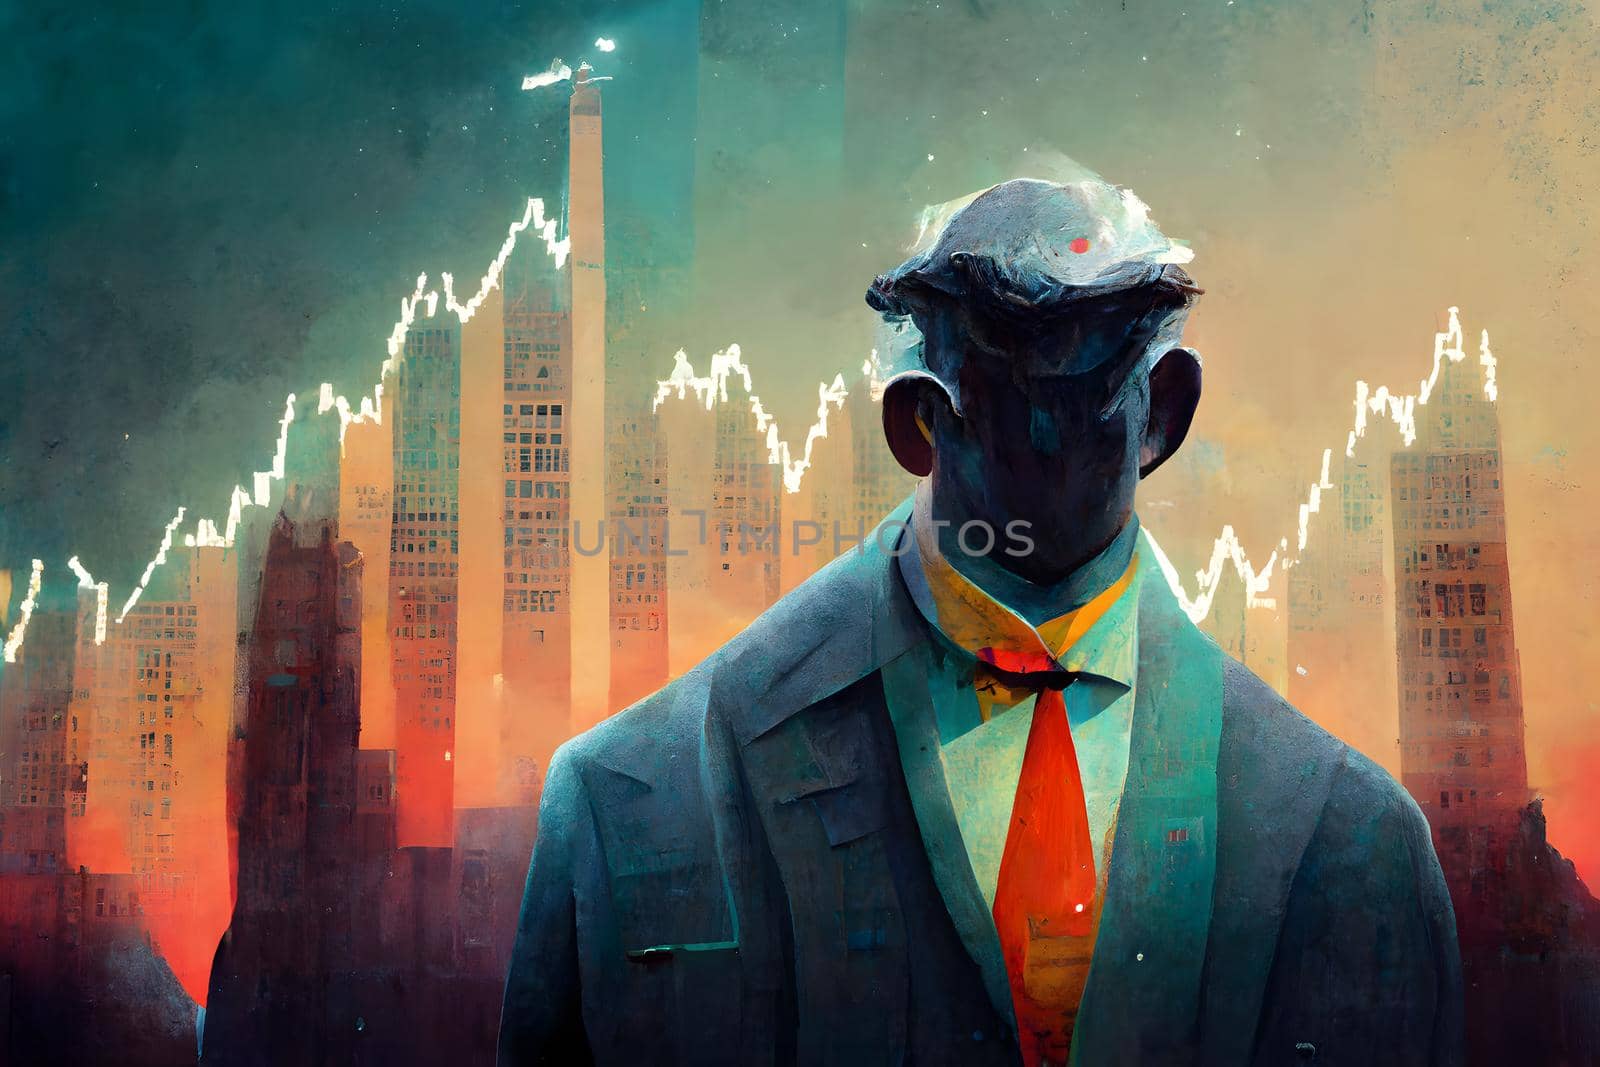 grotesque cartoon business man figure in front of bizarre styled charts and skyscrapers, neural network generated art by z1b